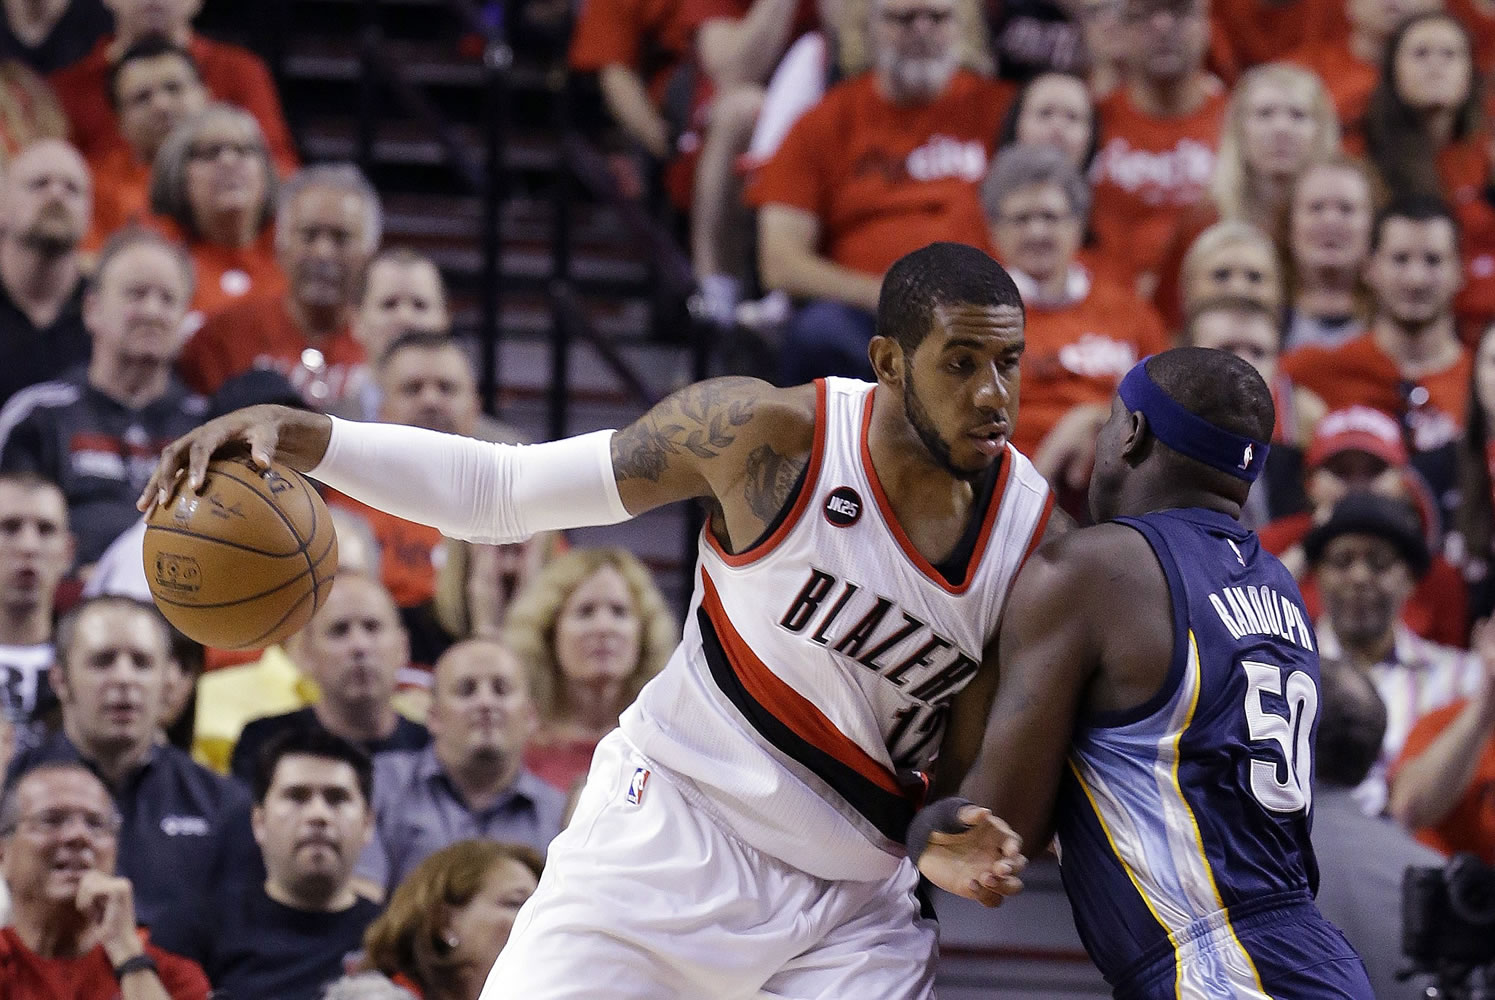 Portland Trail Blazers forward LaMarcus Aldridge, left, works the ball in against Memphis Grizzlies forward Zach Randolph during the first half of Game 4 in Portland on Monday, April 27, 2015.